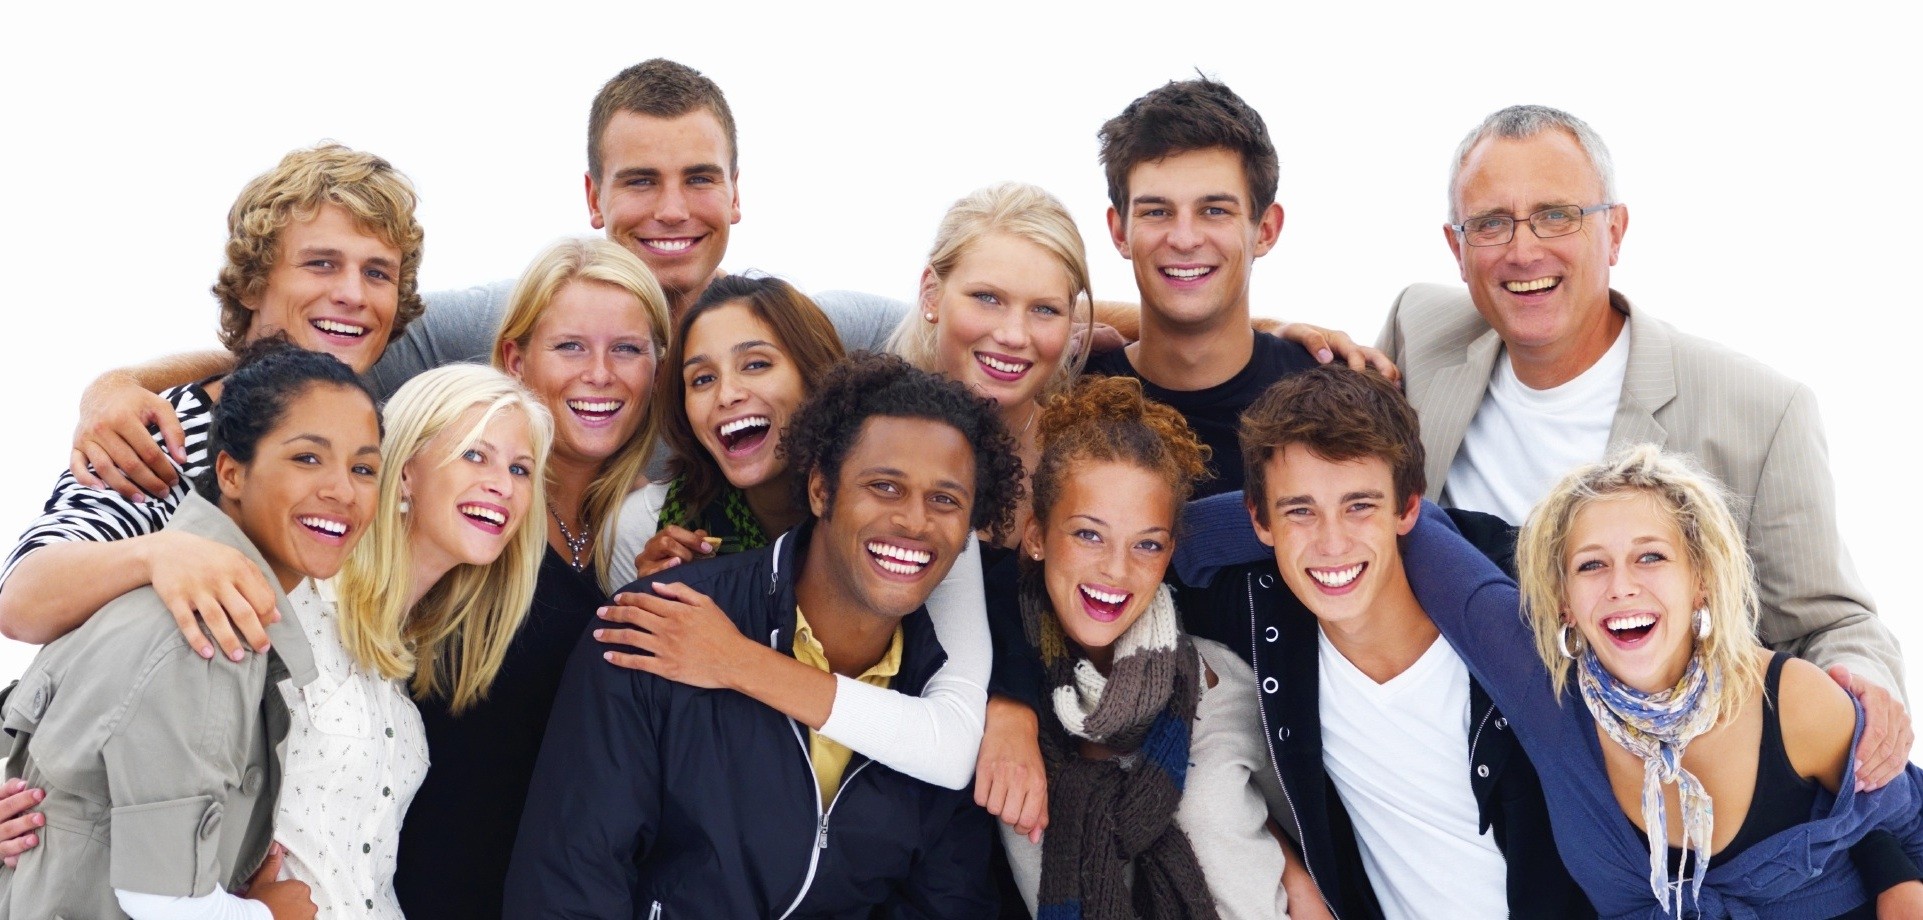 Group of smiling friends against white background.